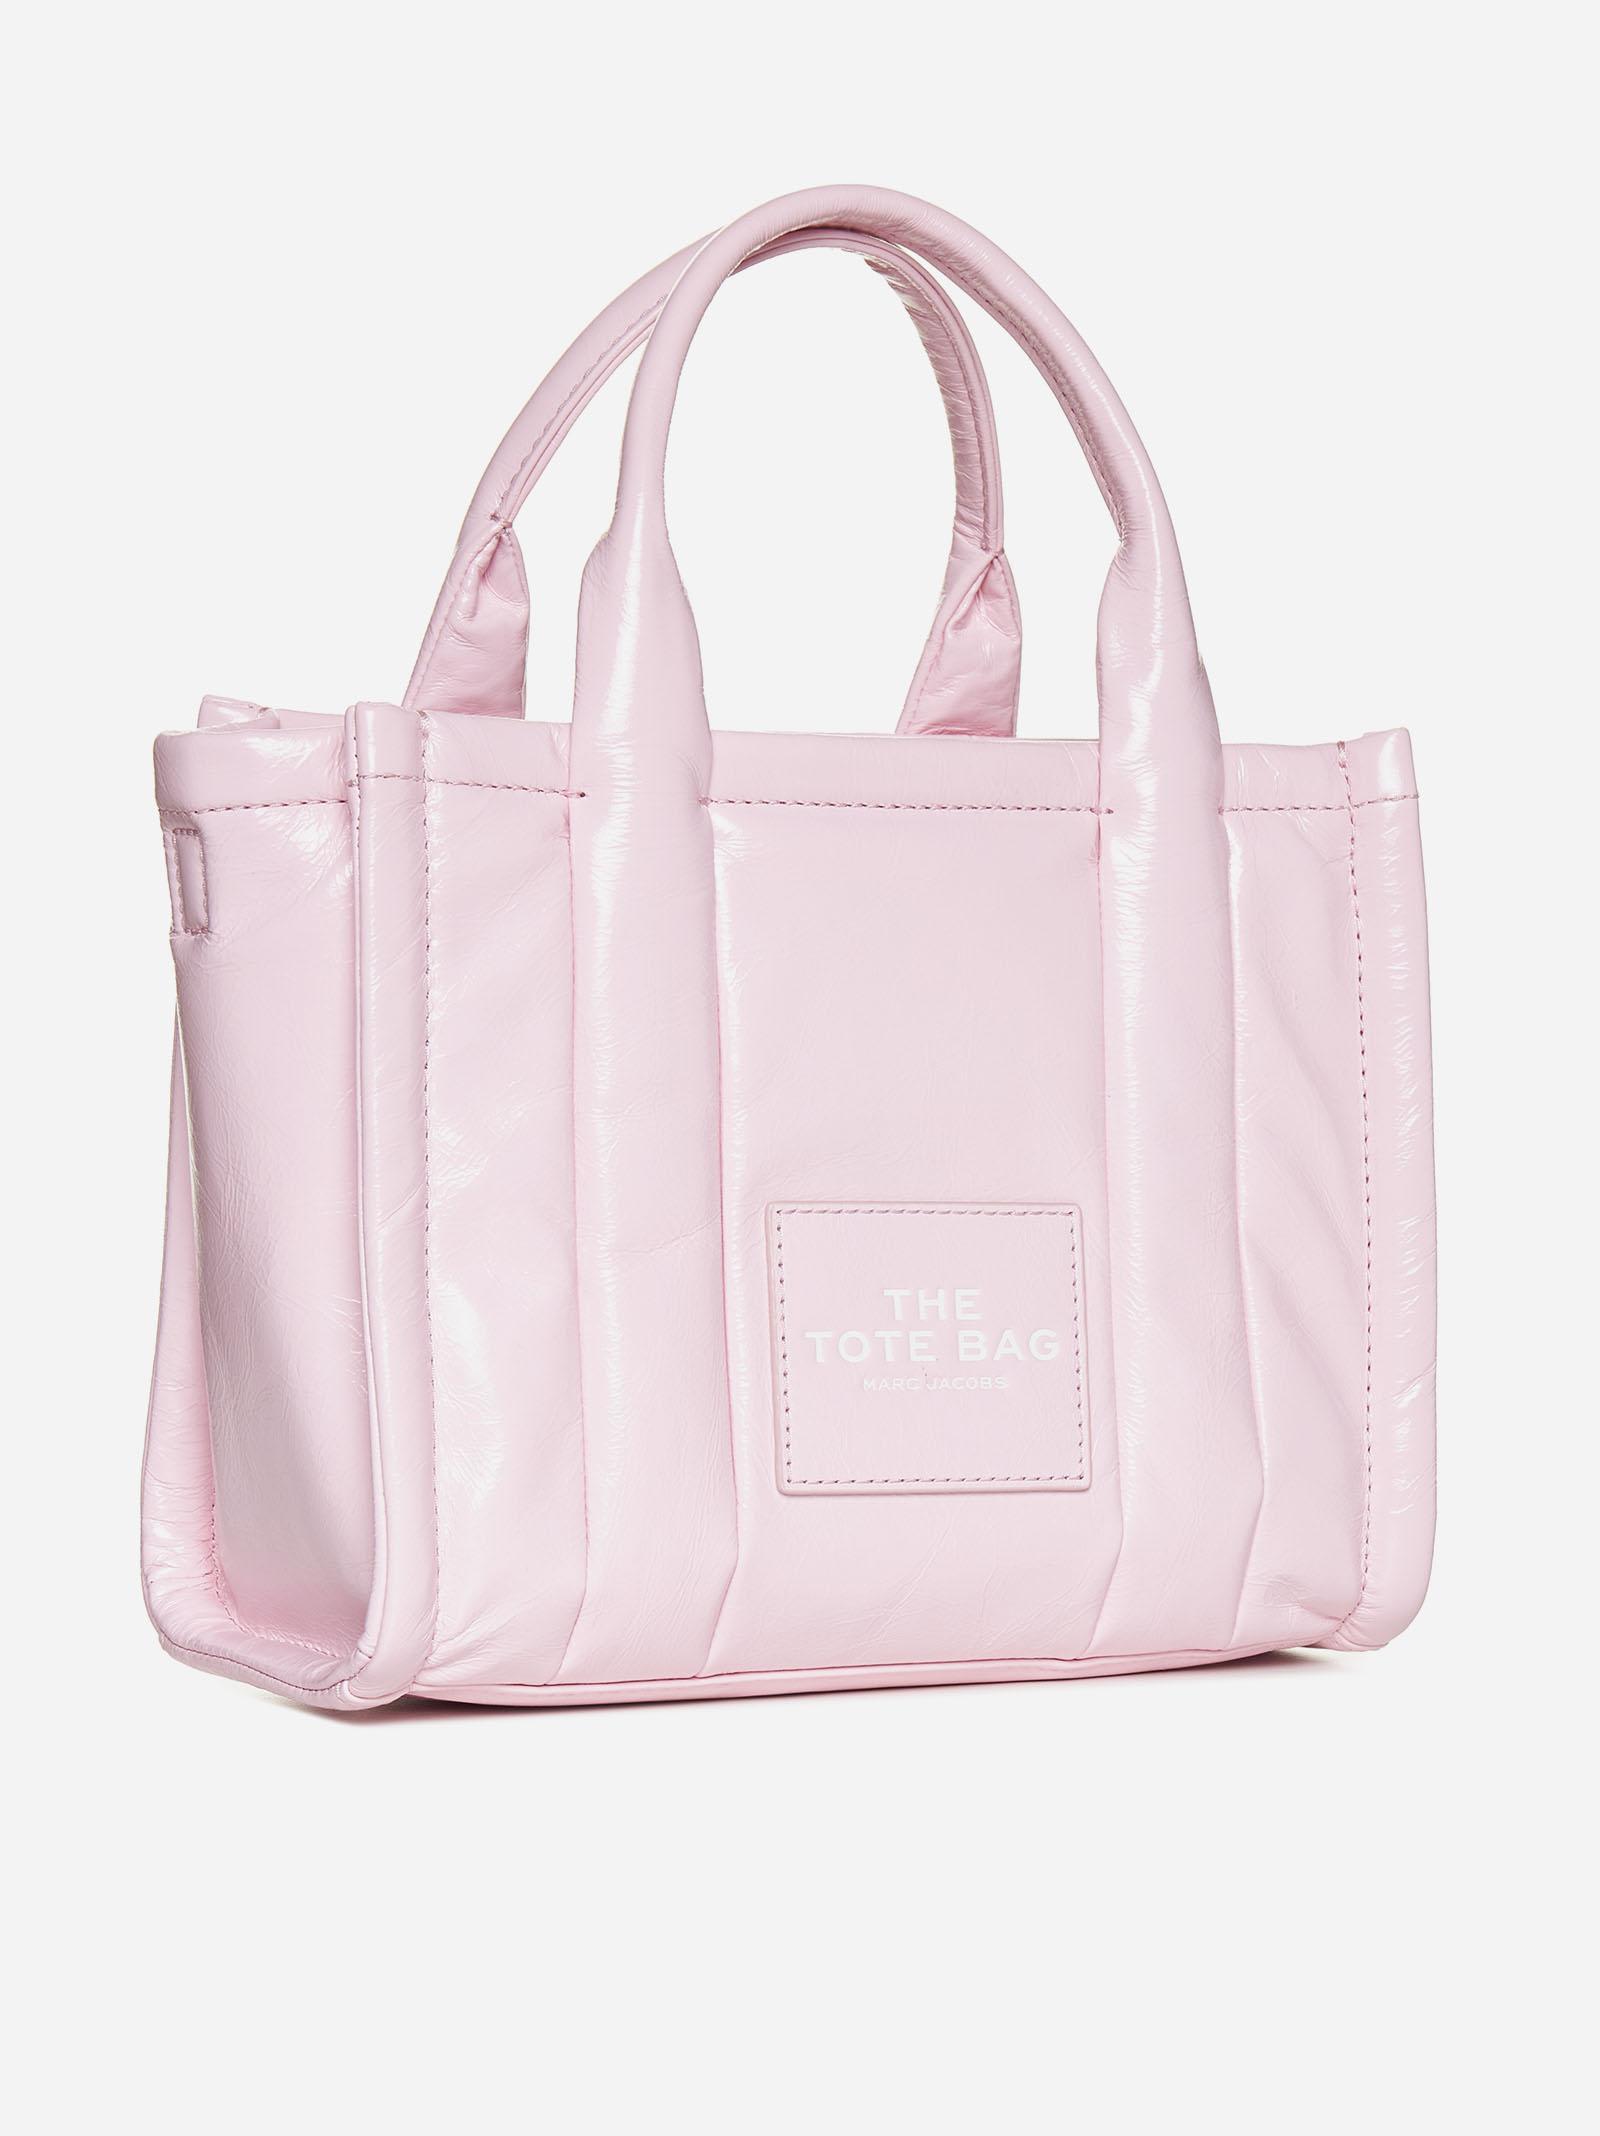 The Mini Tote Bag - Marc Jacobs - Leather - Pink